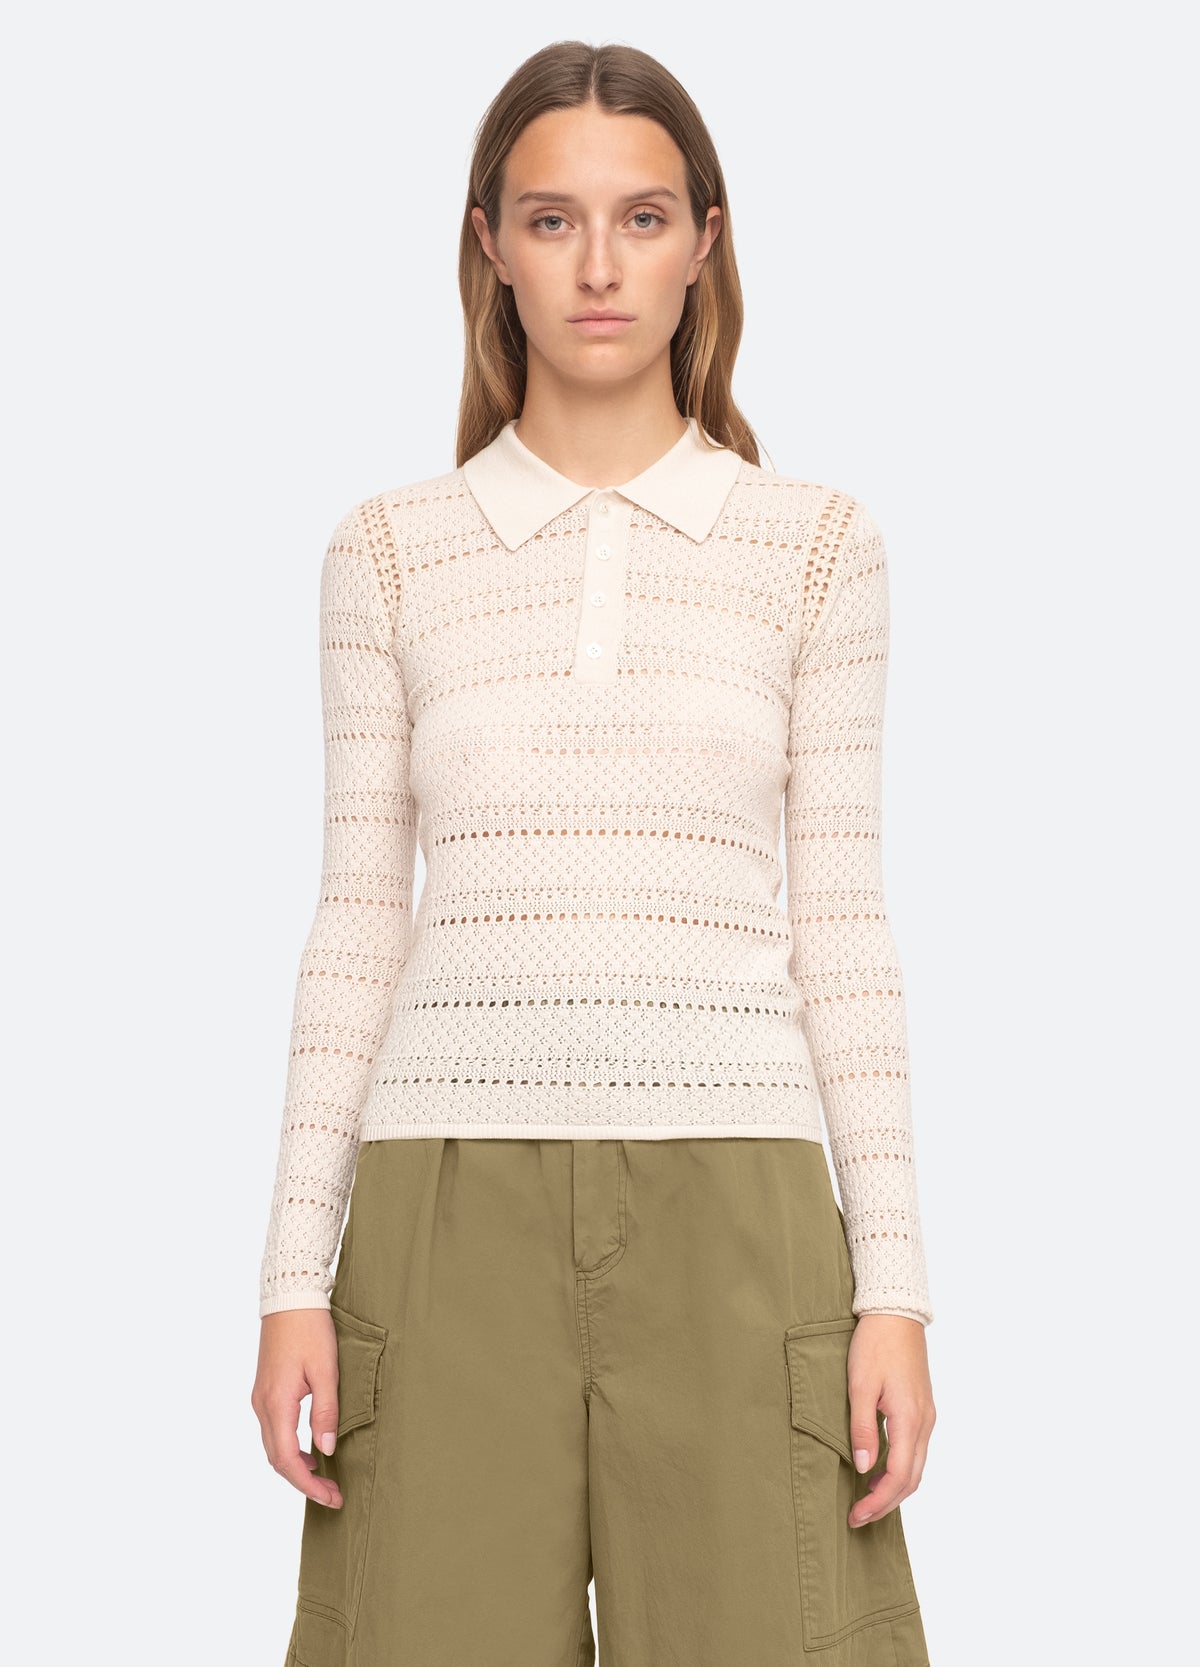 cream-syble sweater-front view 2 - 1